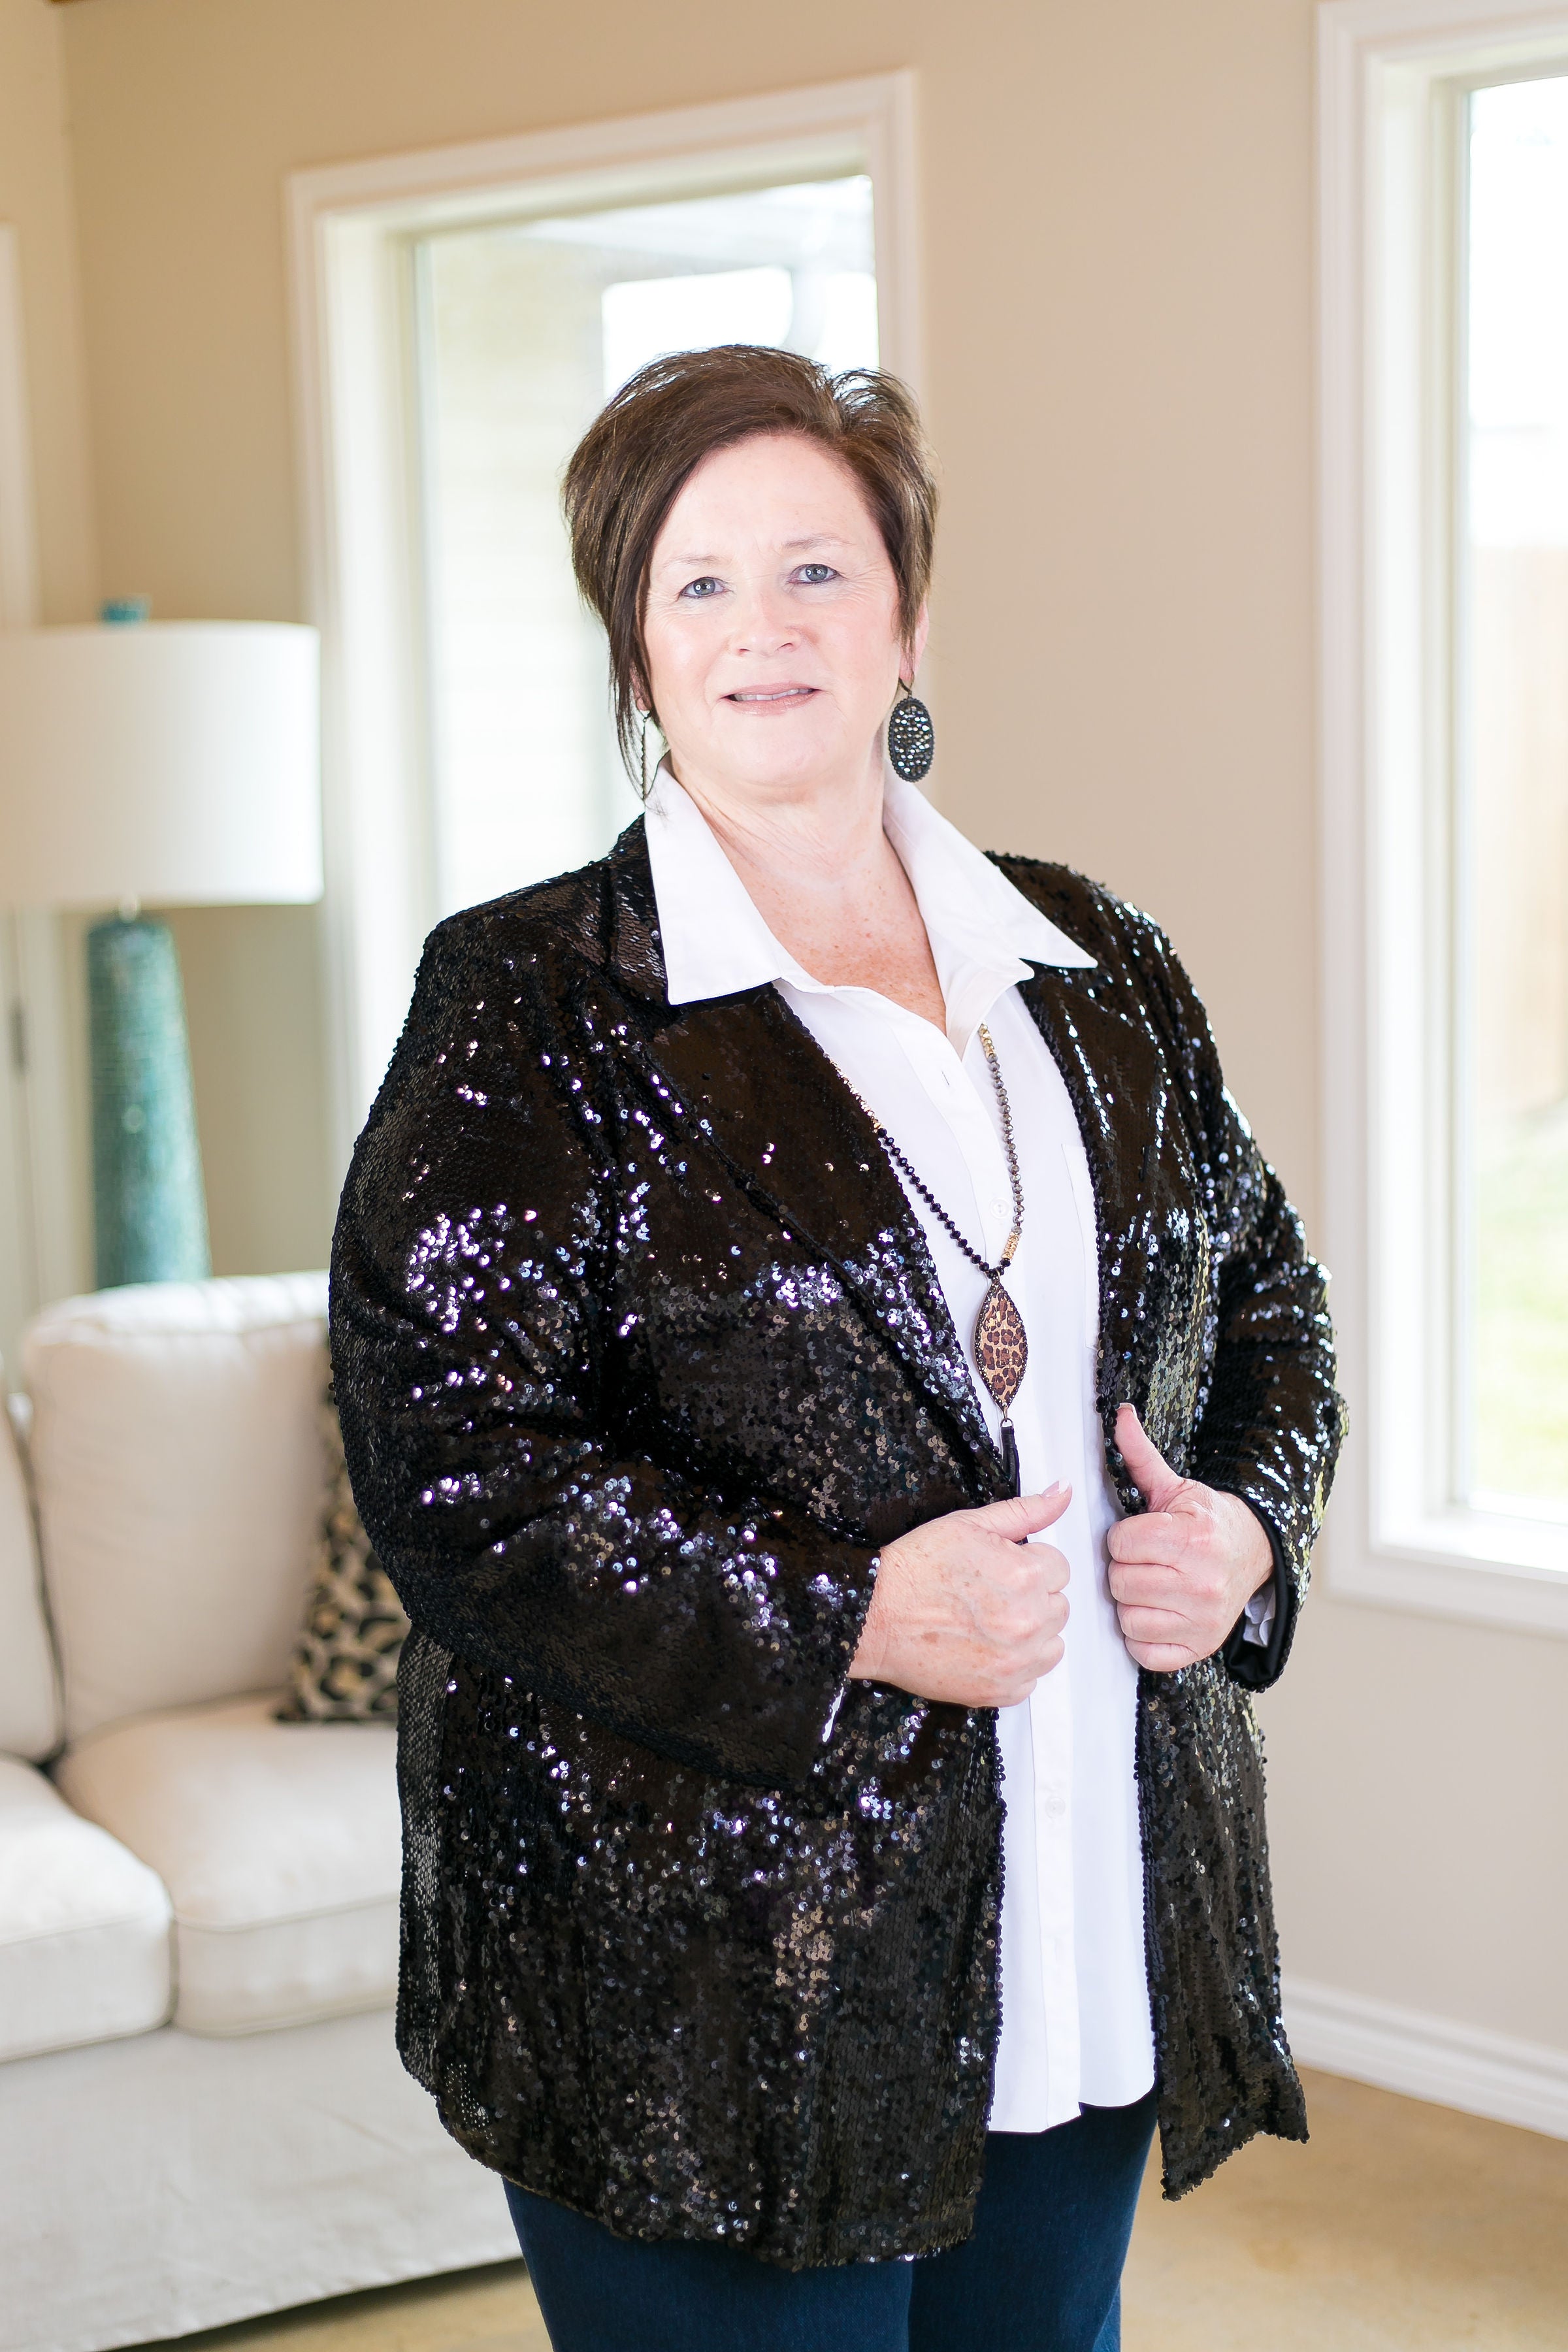 Plus Size Dazzle Them All Sequin Blazer Jacket in Black - Giddy Up Glamour Boutique